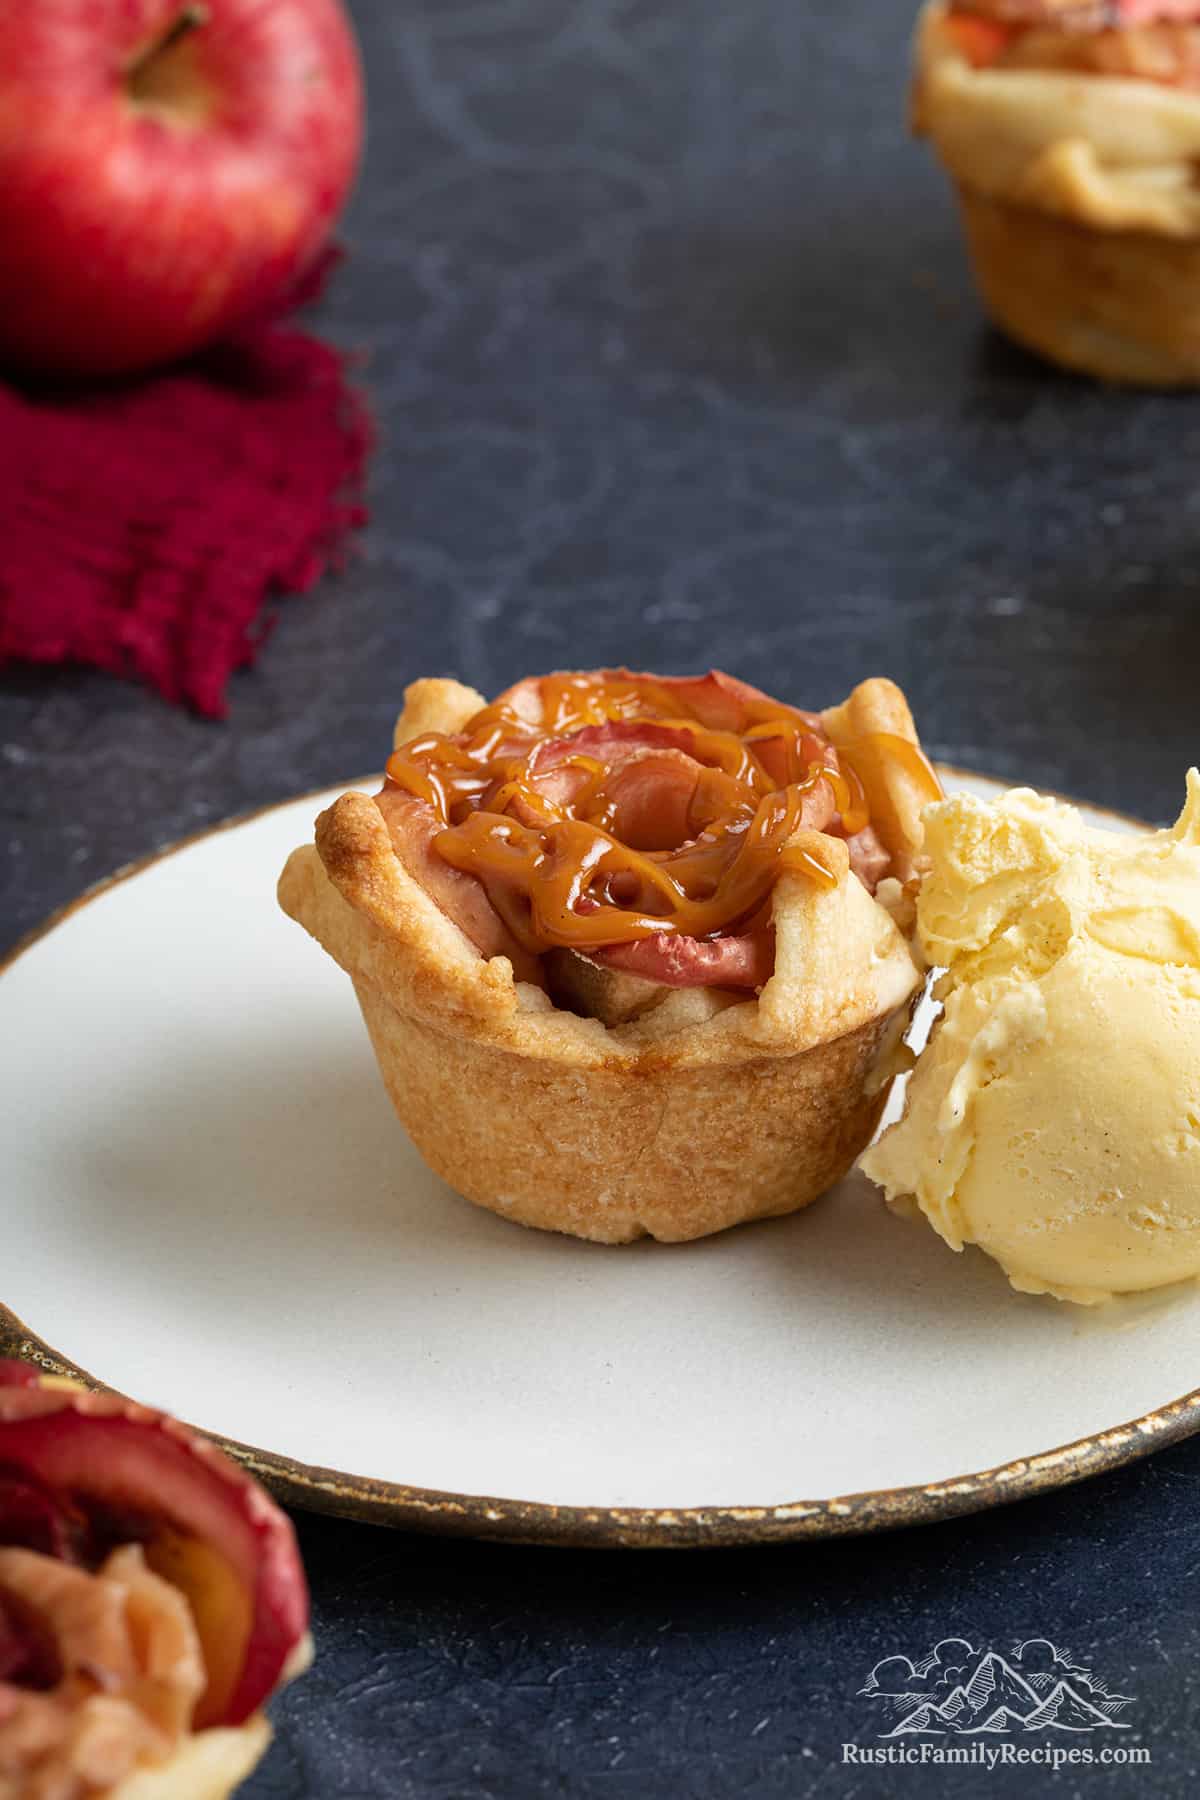 An apple tartlet on a plate with ice cream